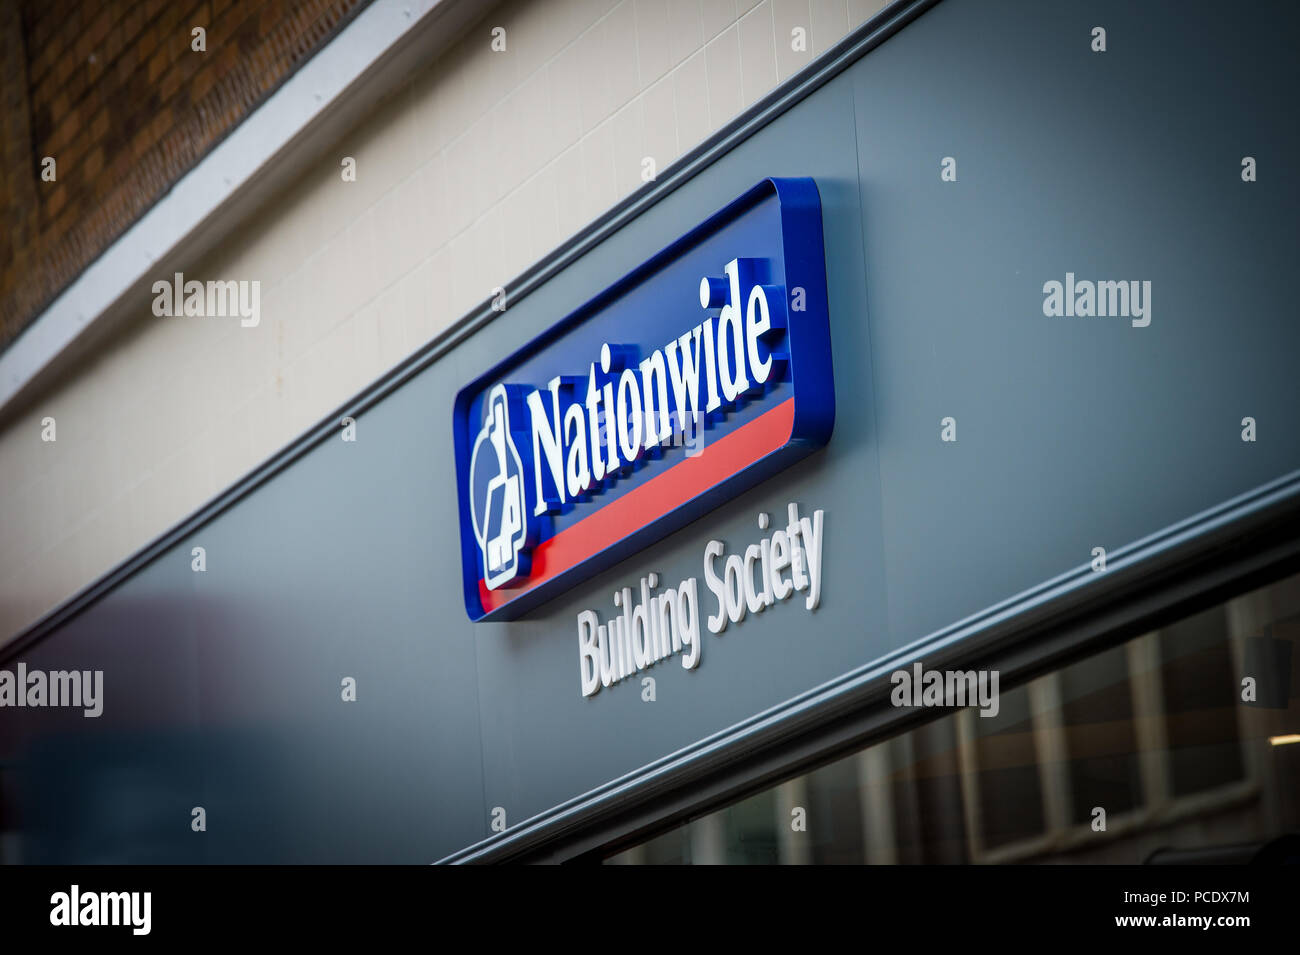 Nationwide building society Stock Photo